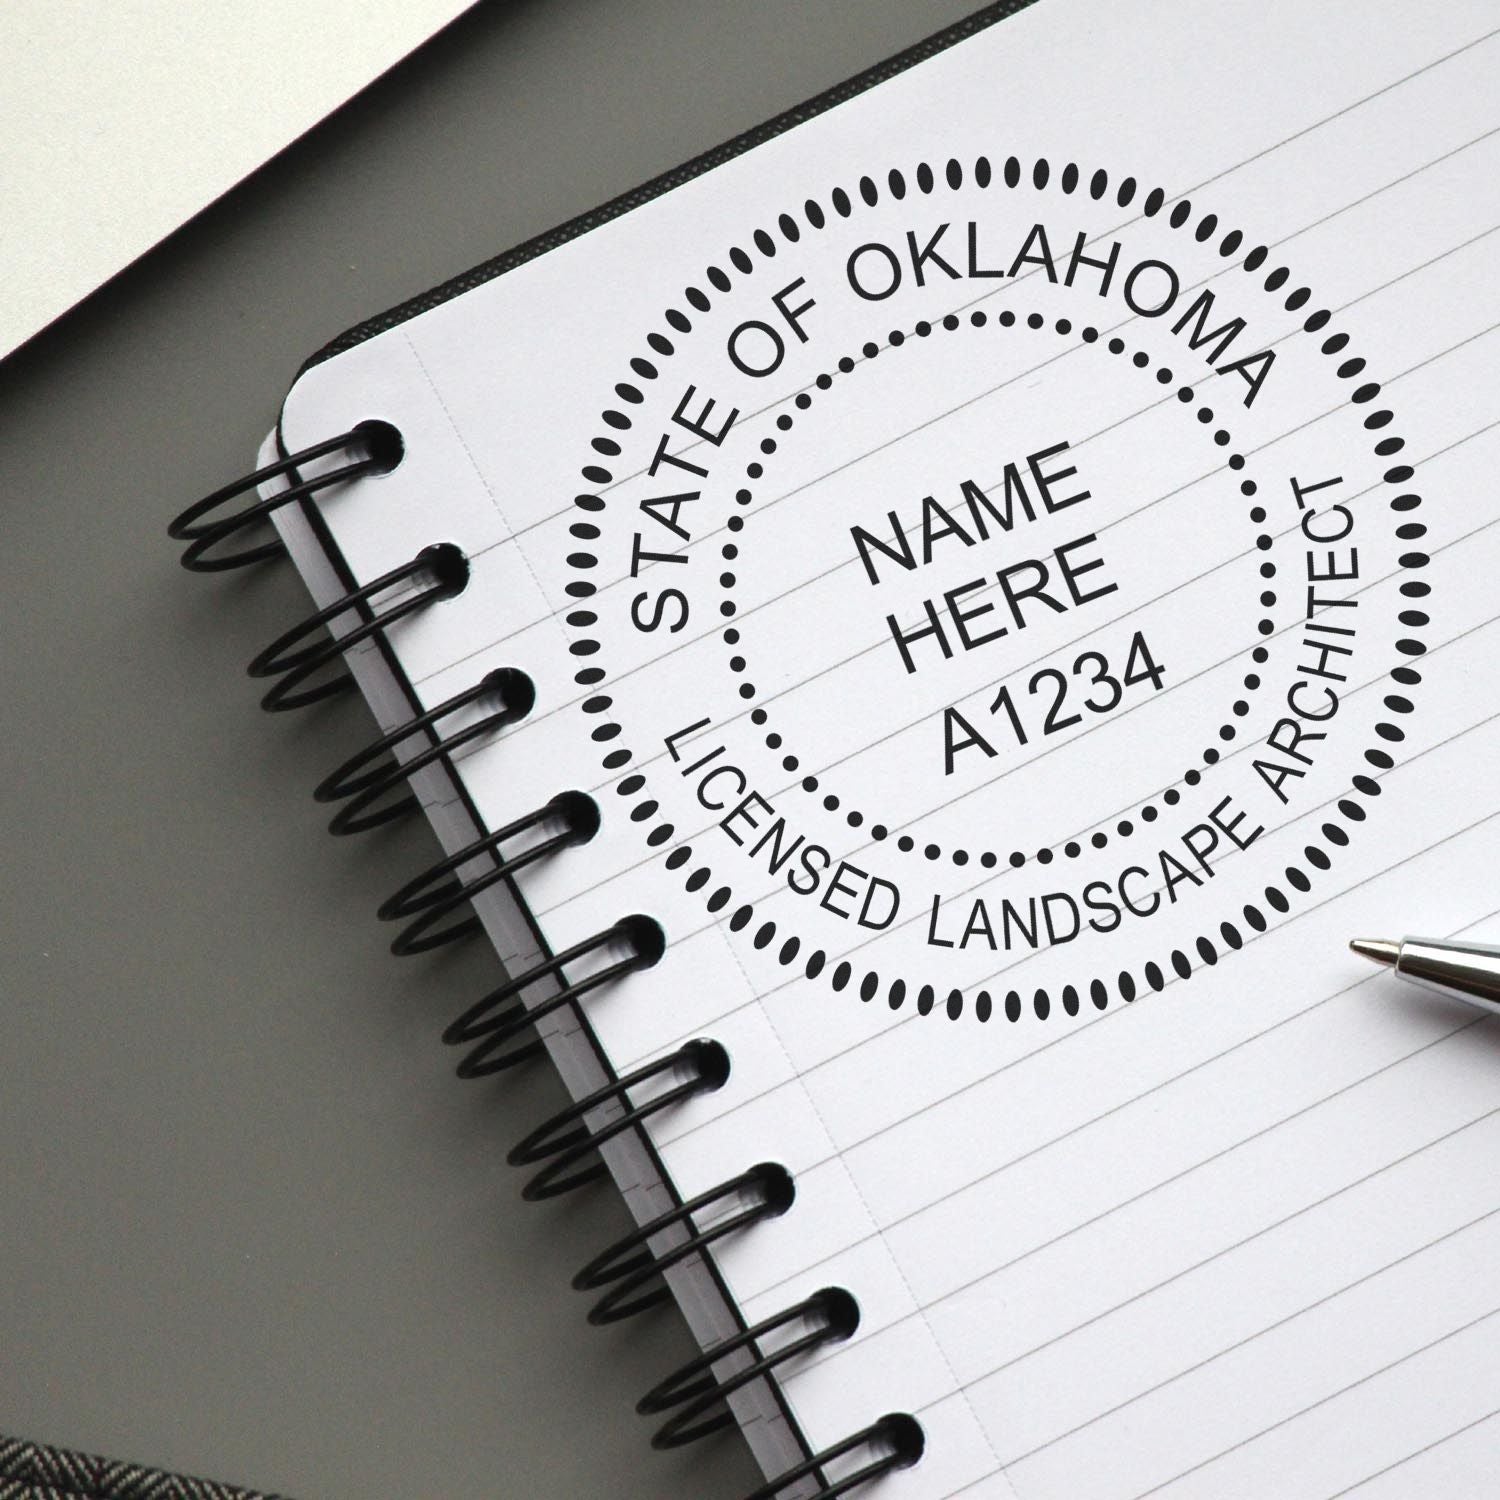 A stamped impression of the Digital Oklahoma Landscape Architect Stamp in this stylish lifestyle photo, setting the tone for a unique and personalized product.